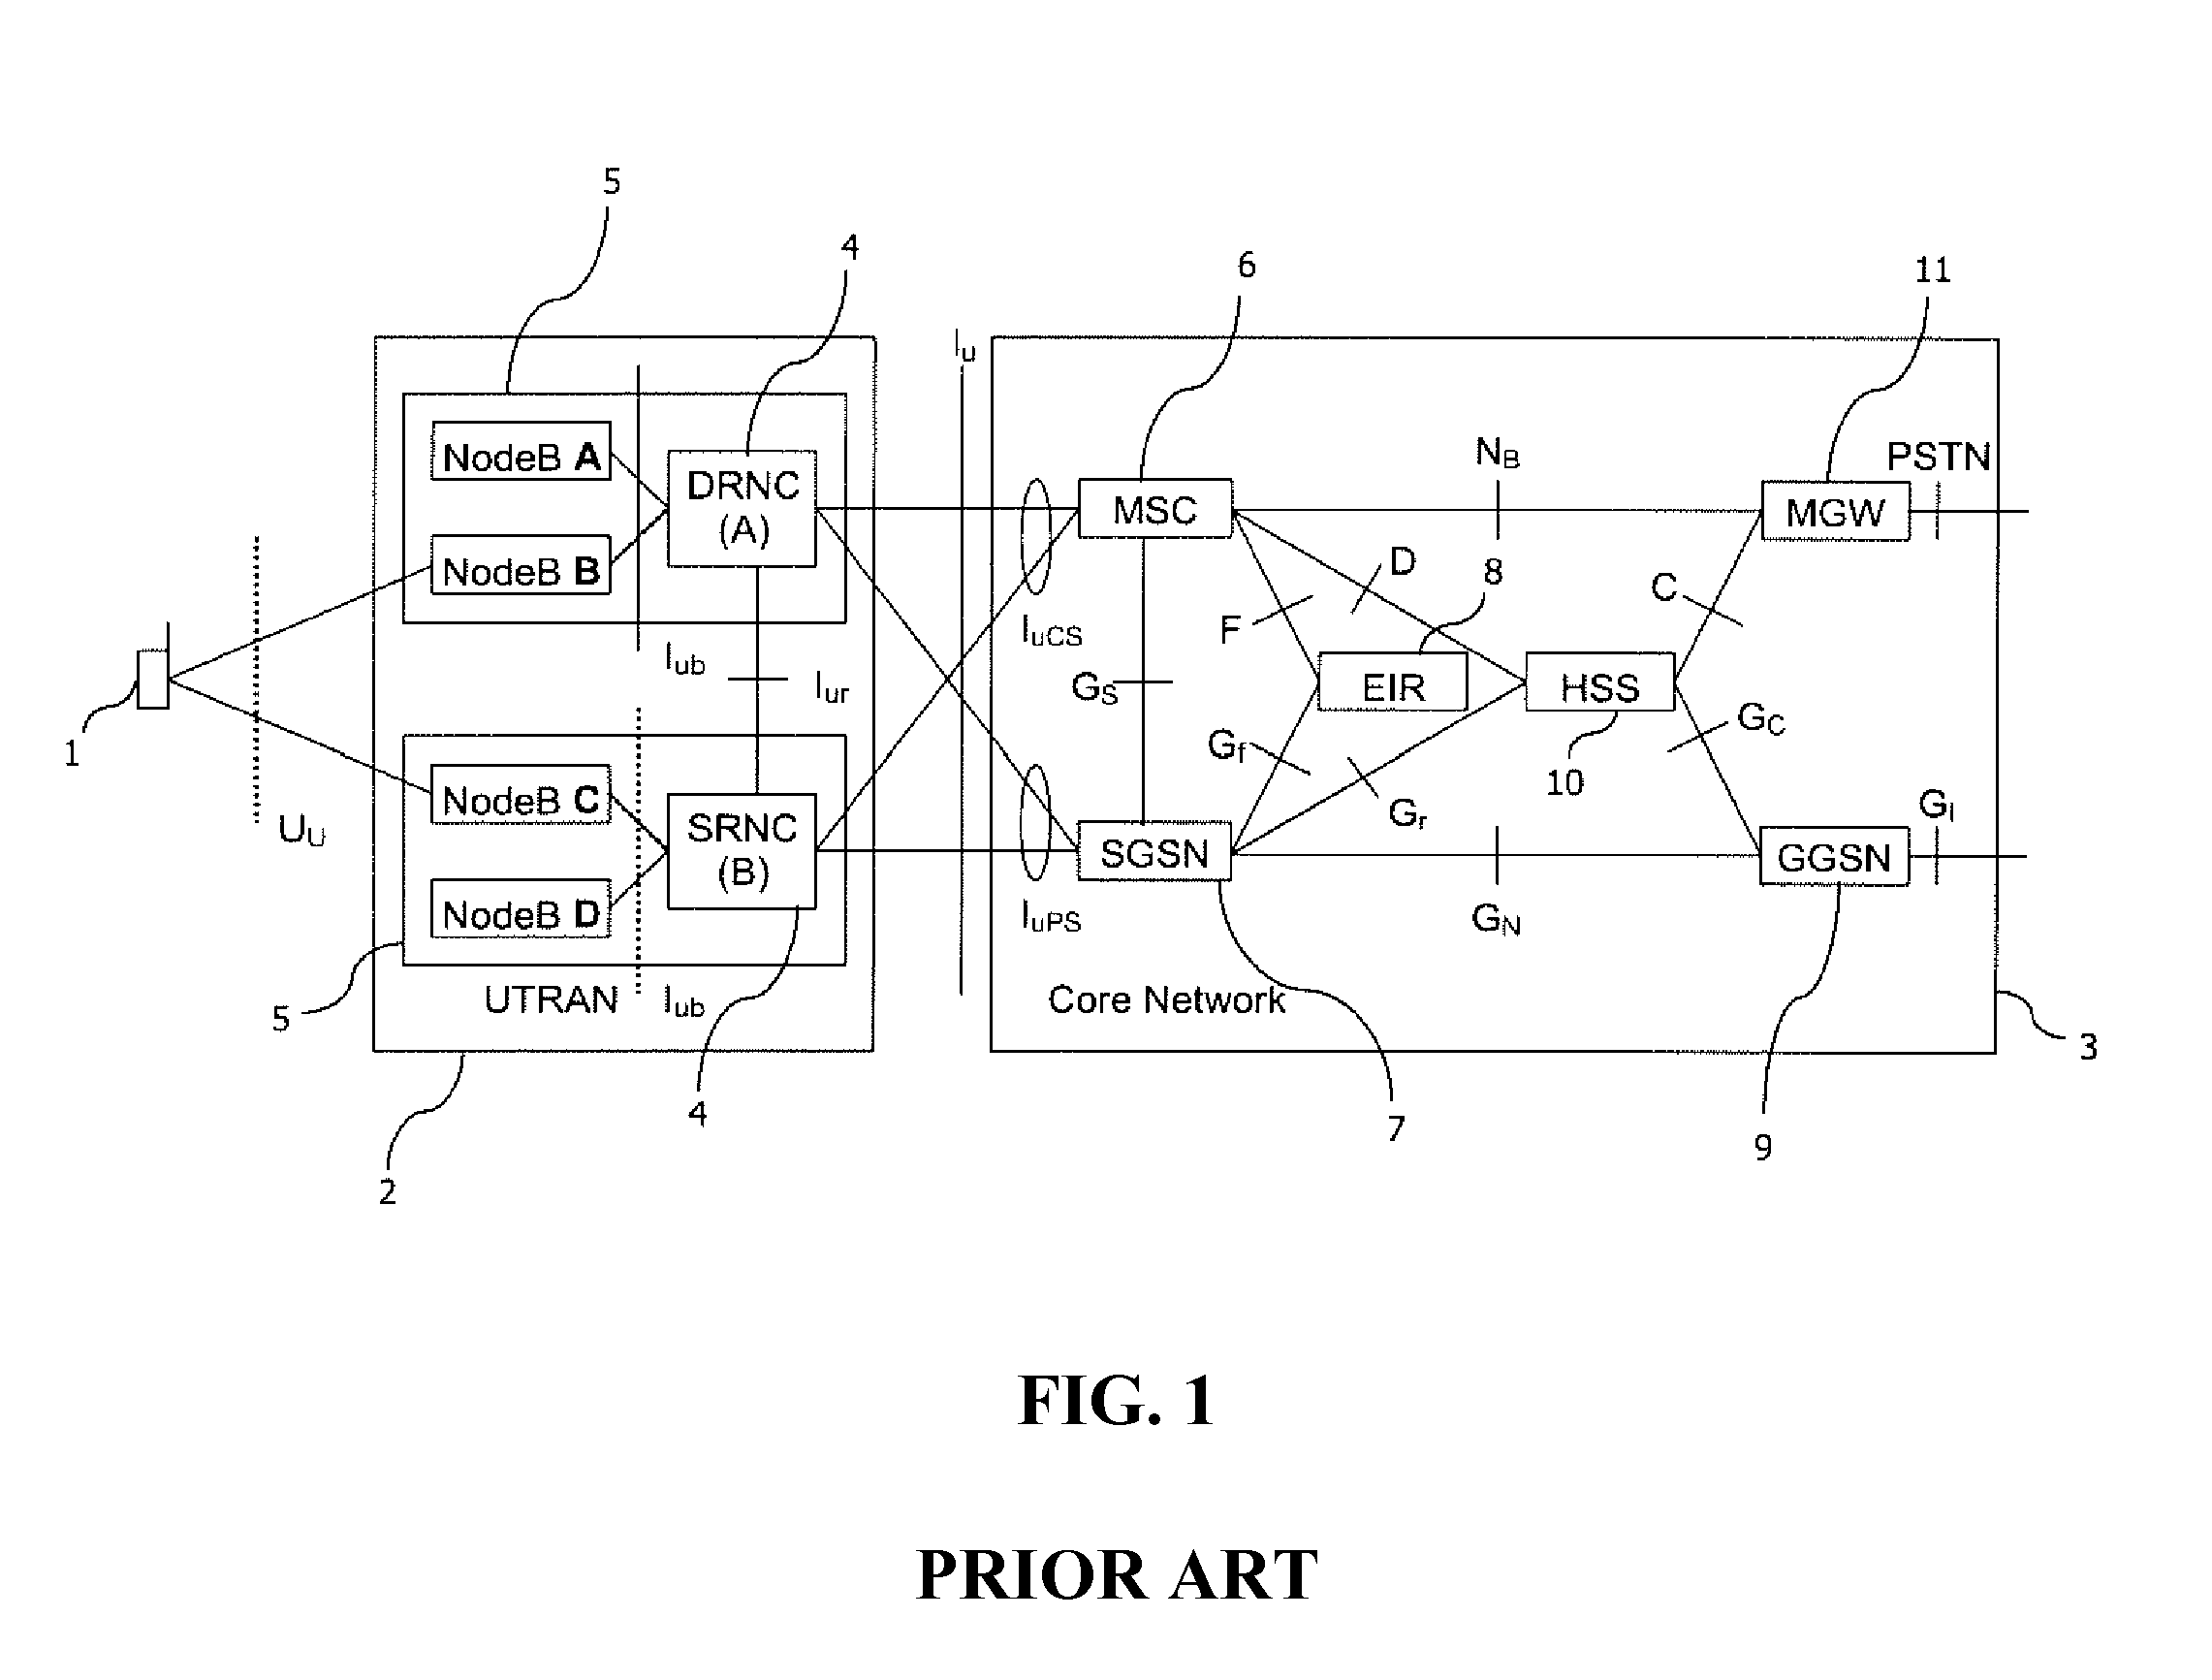 Network signaling for point-to-multipoint service over single frequency network mode